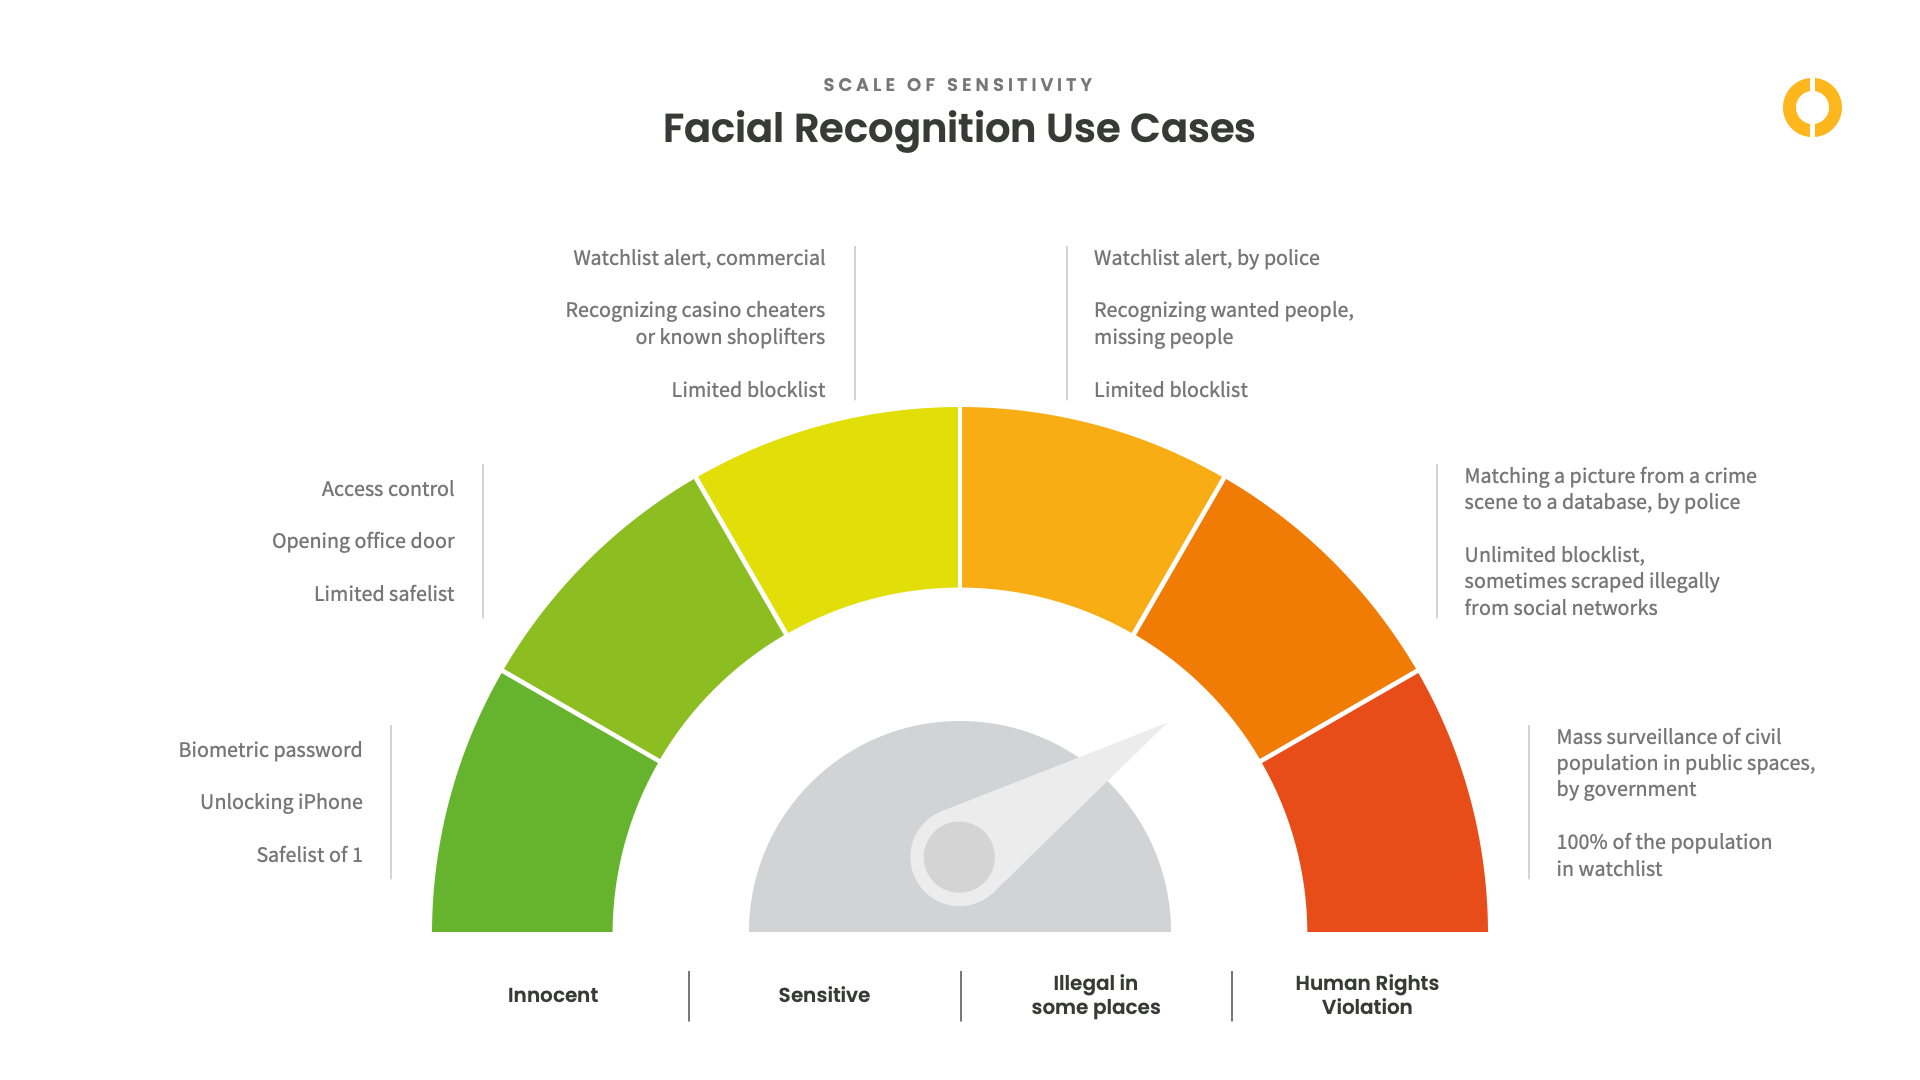 diagram showing the scale of sensitivity in many facial recognition use cases. The range is from innocent, to sensitive, to illegal in some places, to human rights violation.